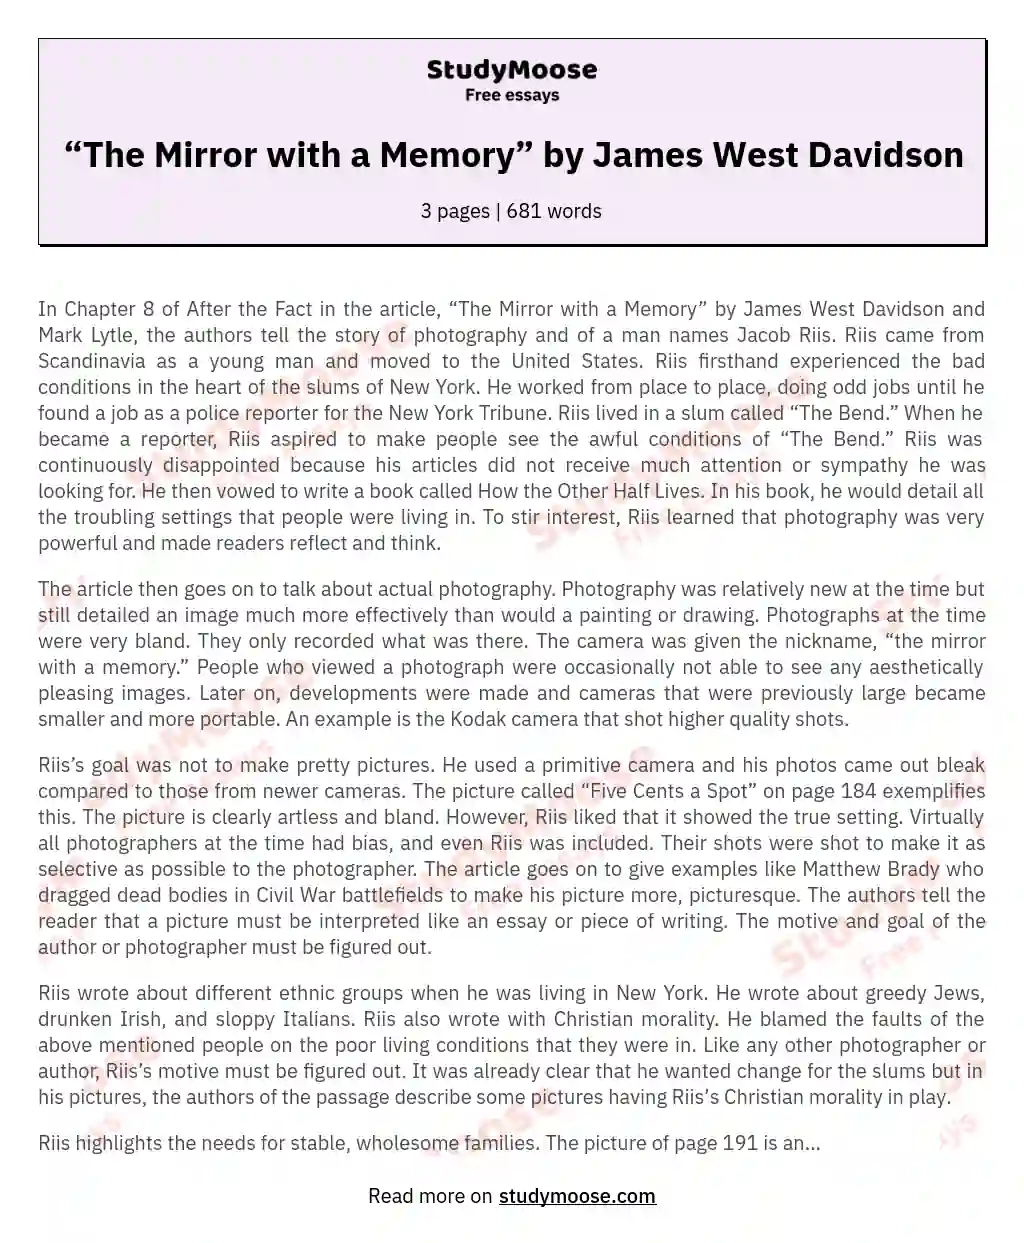 “The Mirror with a Memory” by James West Davidson essay